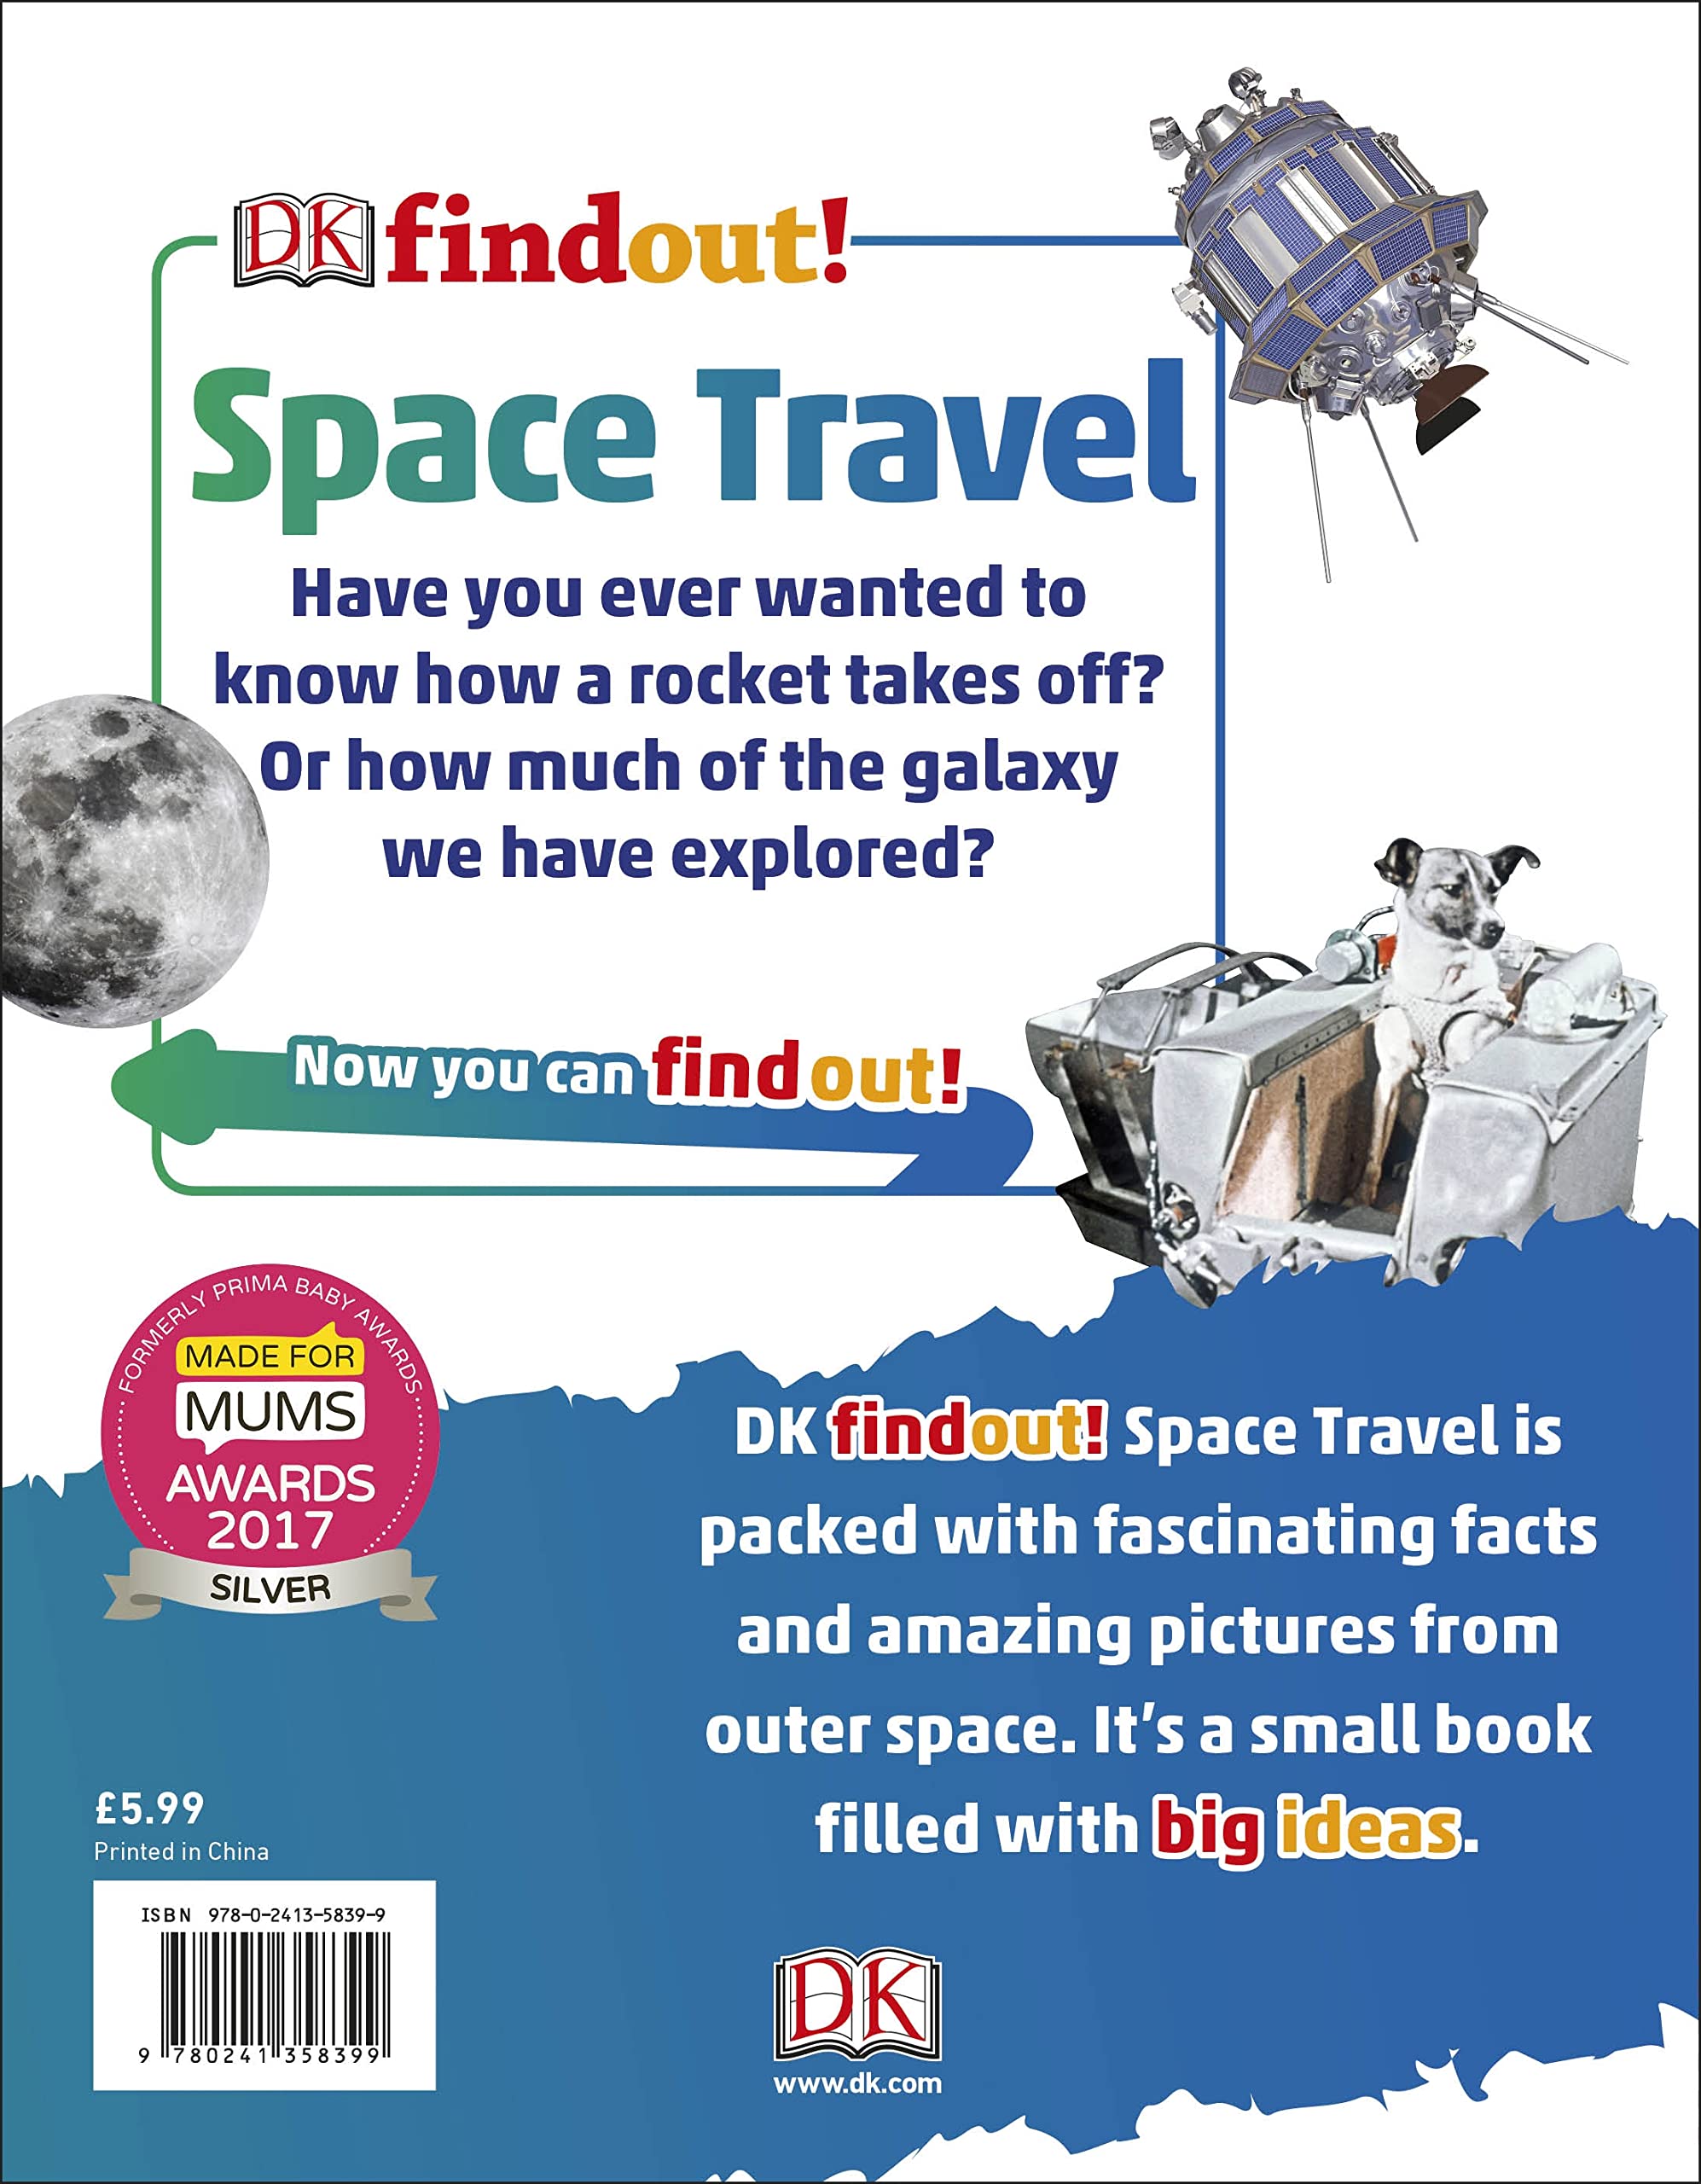 DK findout! Space Travel